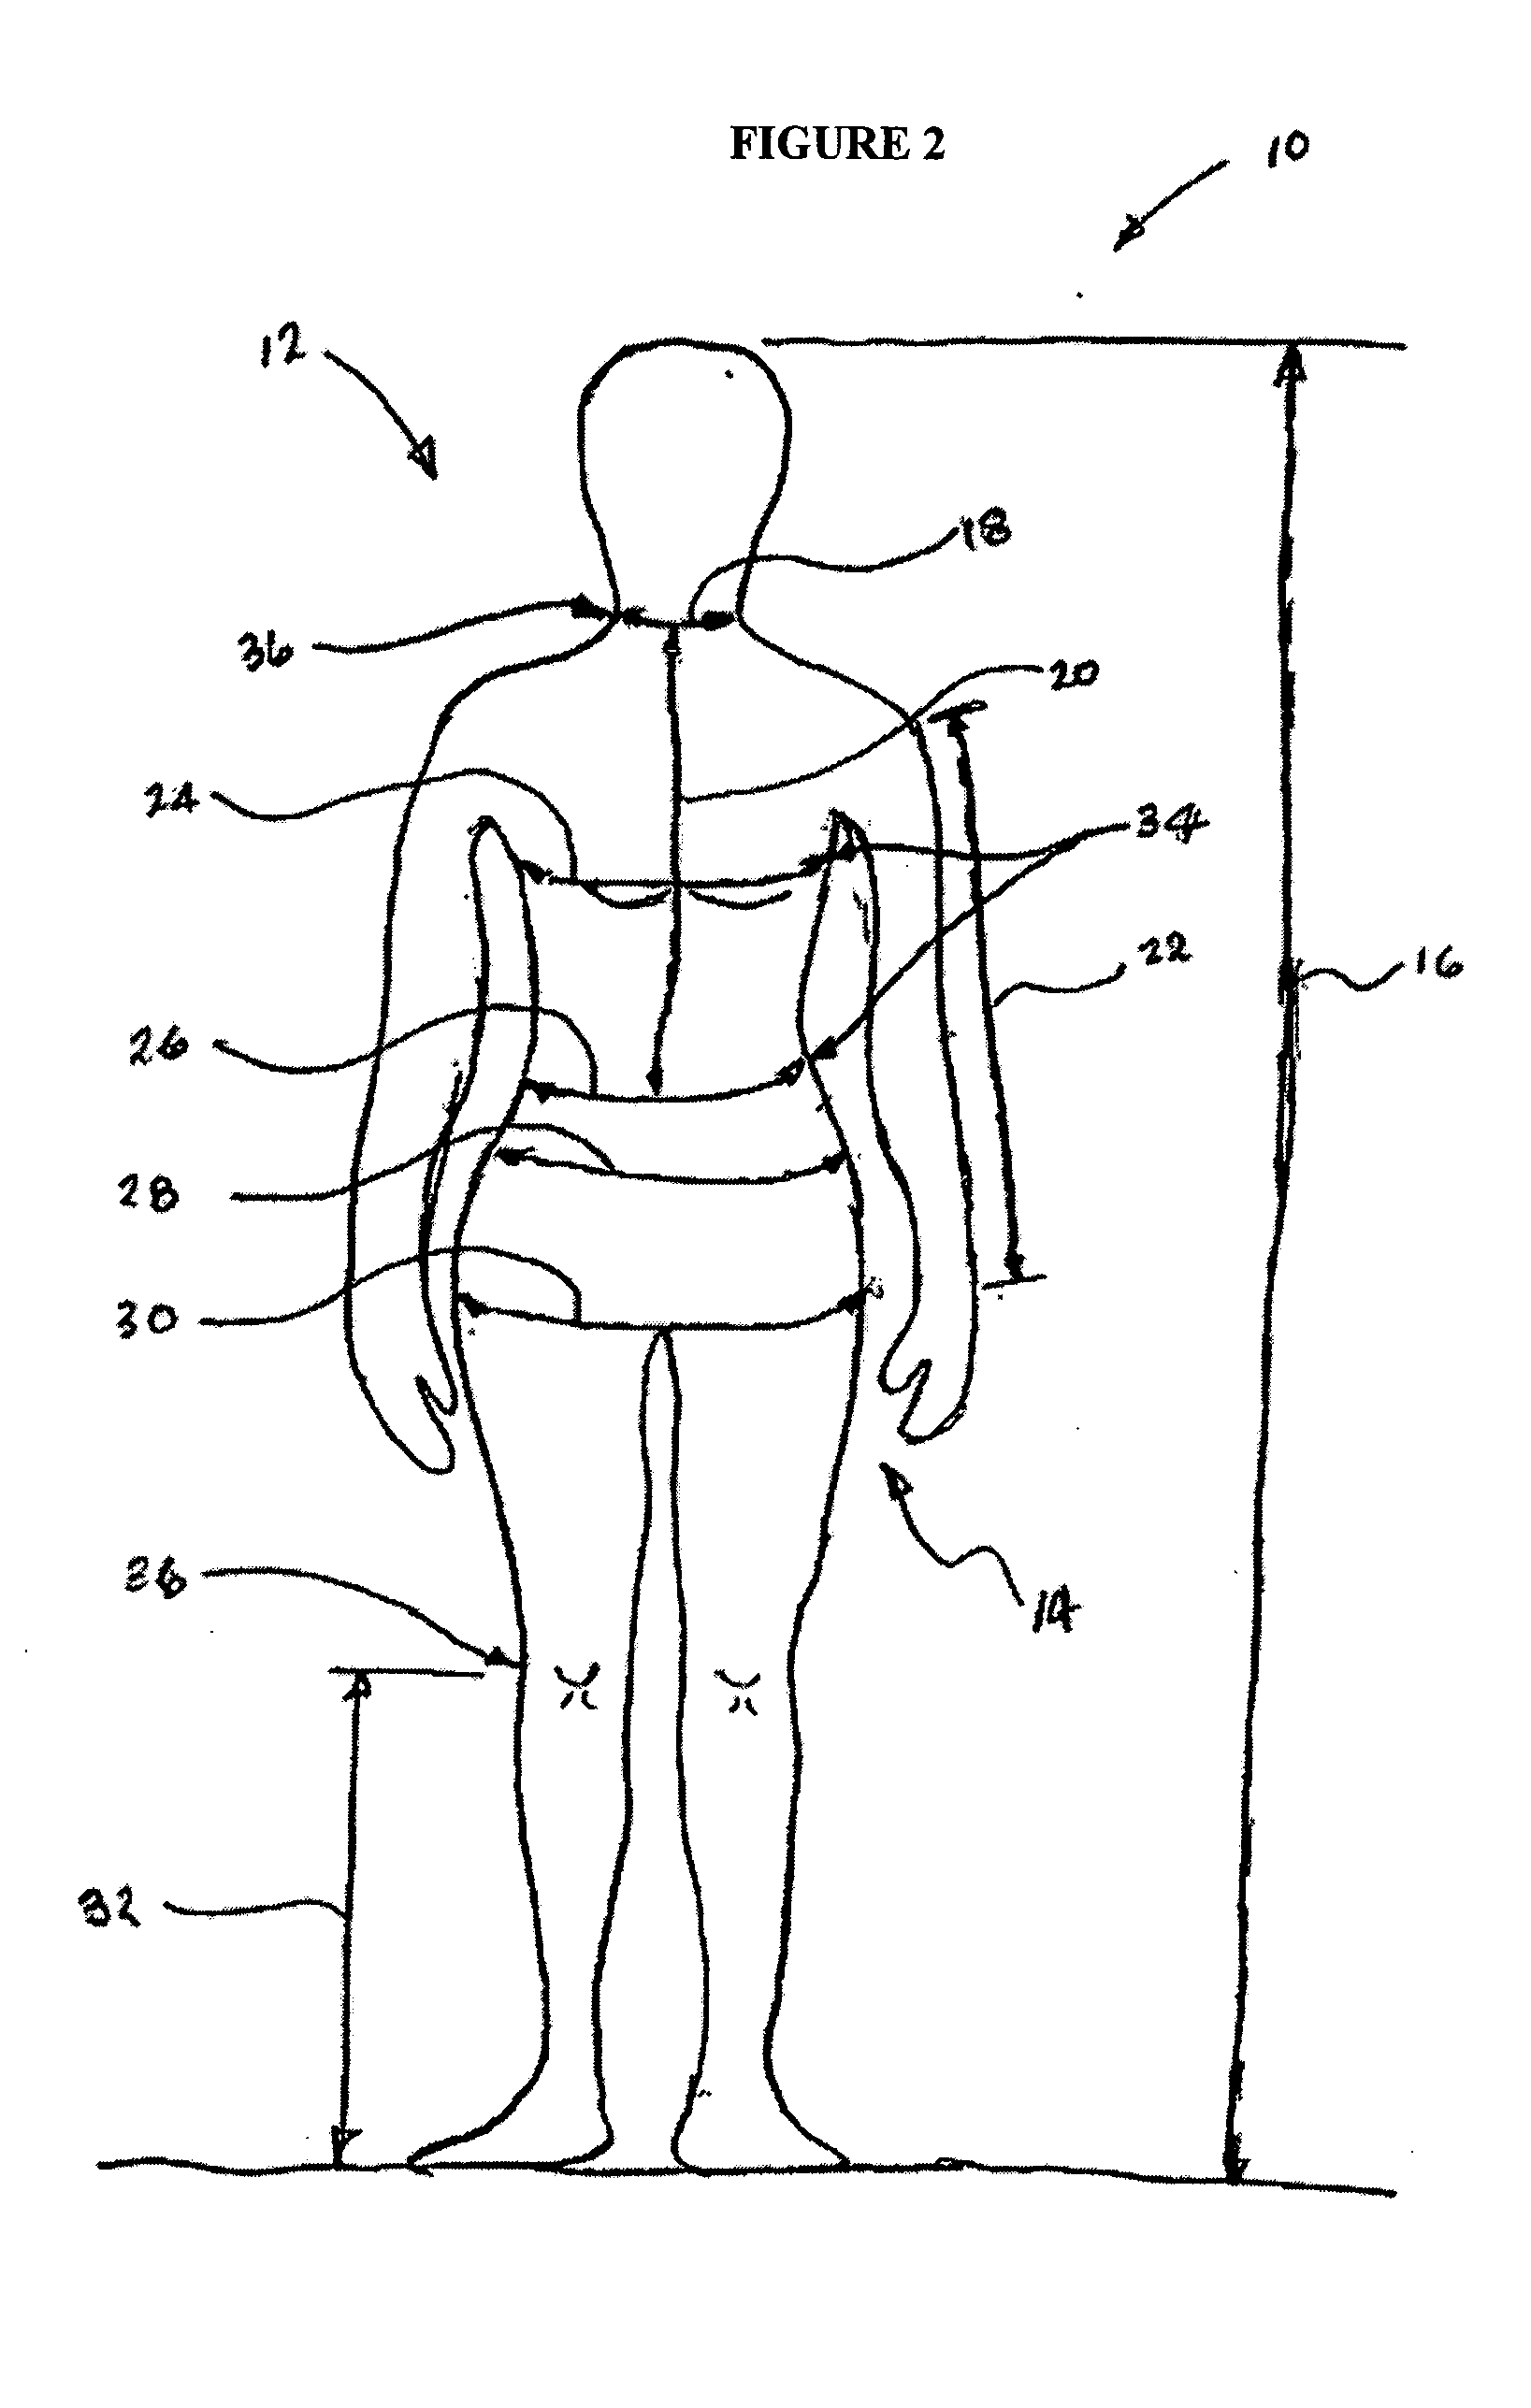 Systems and methods for improved apparel fit